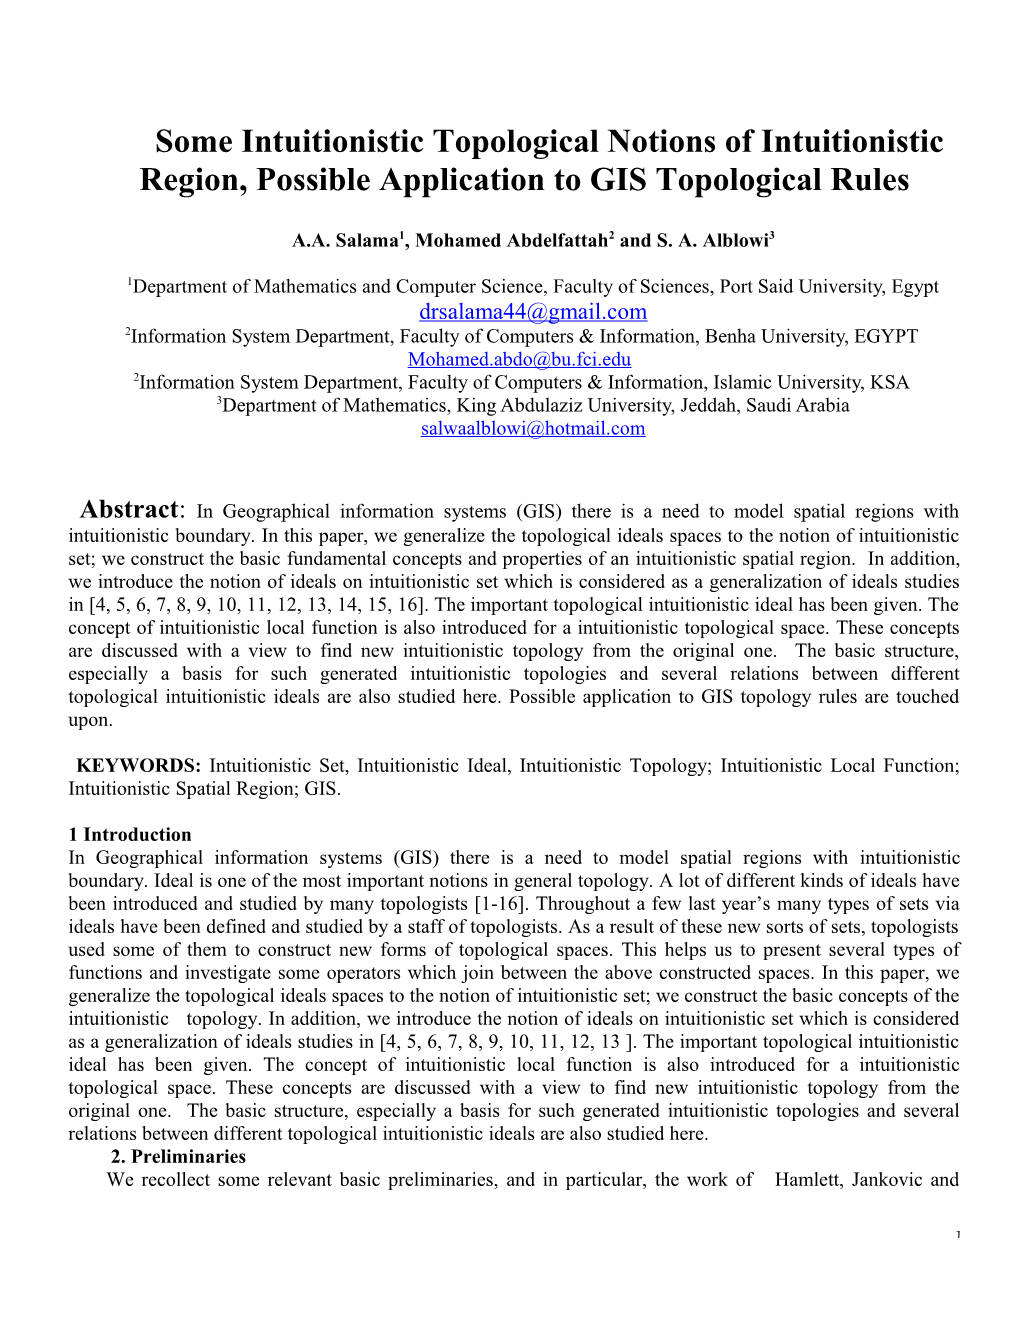 Some Intuitionistic Topological Notions of Intuitionistic Region, Possible Application